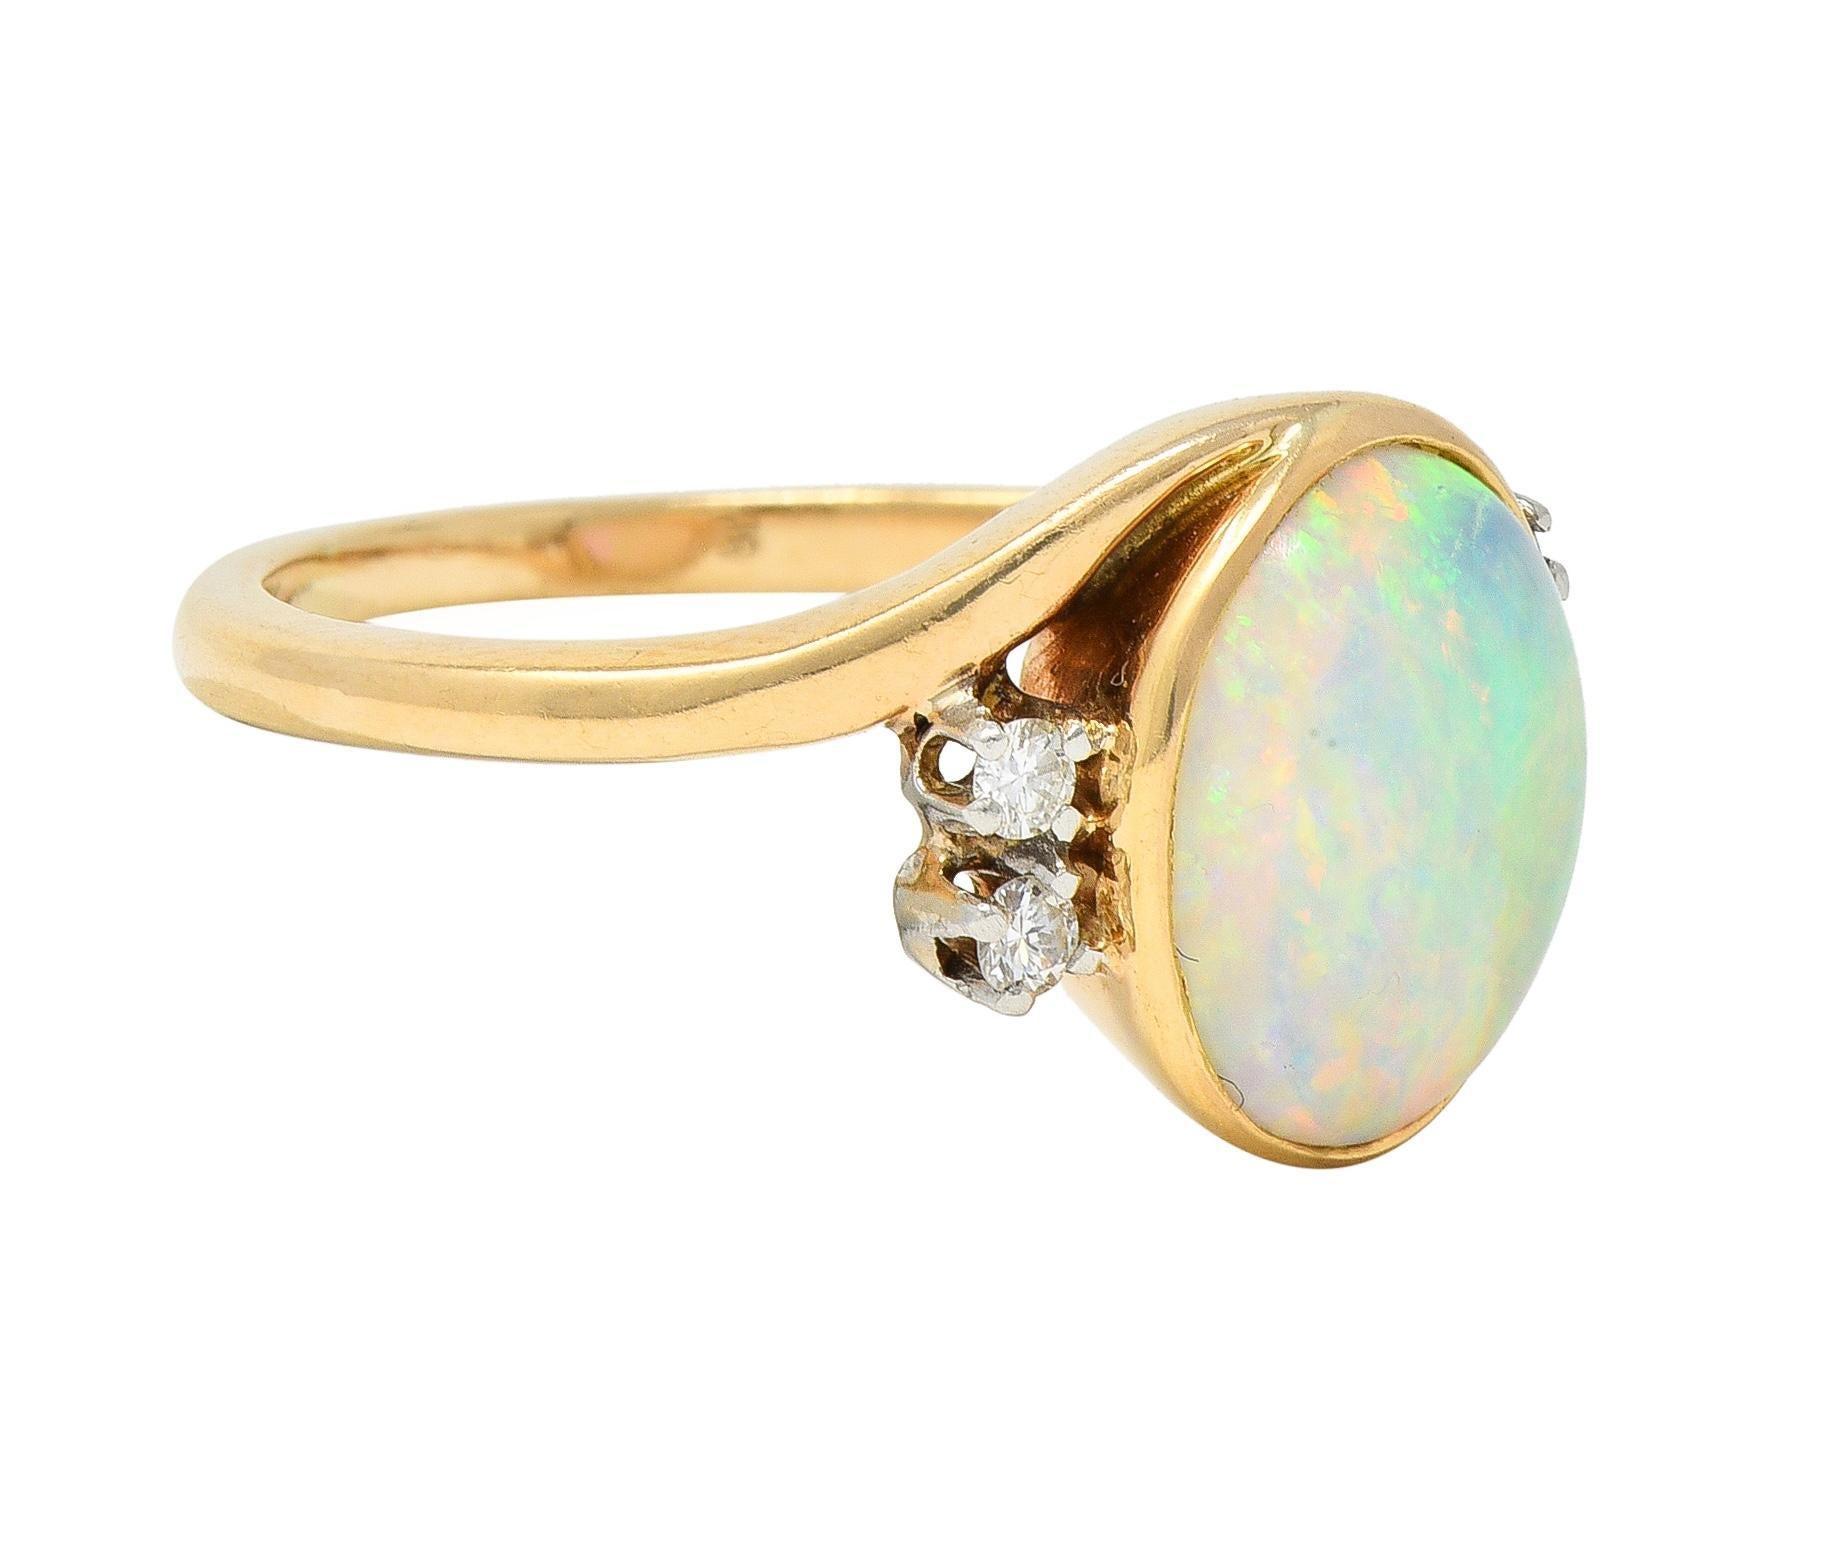 Centering a bezel set oval-shaped opal cabochon measuring 9.0 x 11.0 mm 
Translucent white in body color with strong spectral play-of-color 
Accented prong set round brilliant cut diamonds
Prong-set in platinum - weighing approximately 0.12 carat